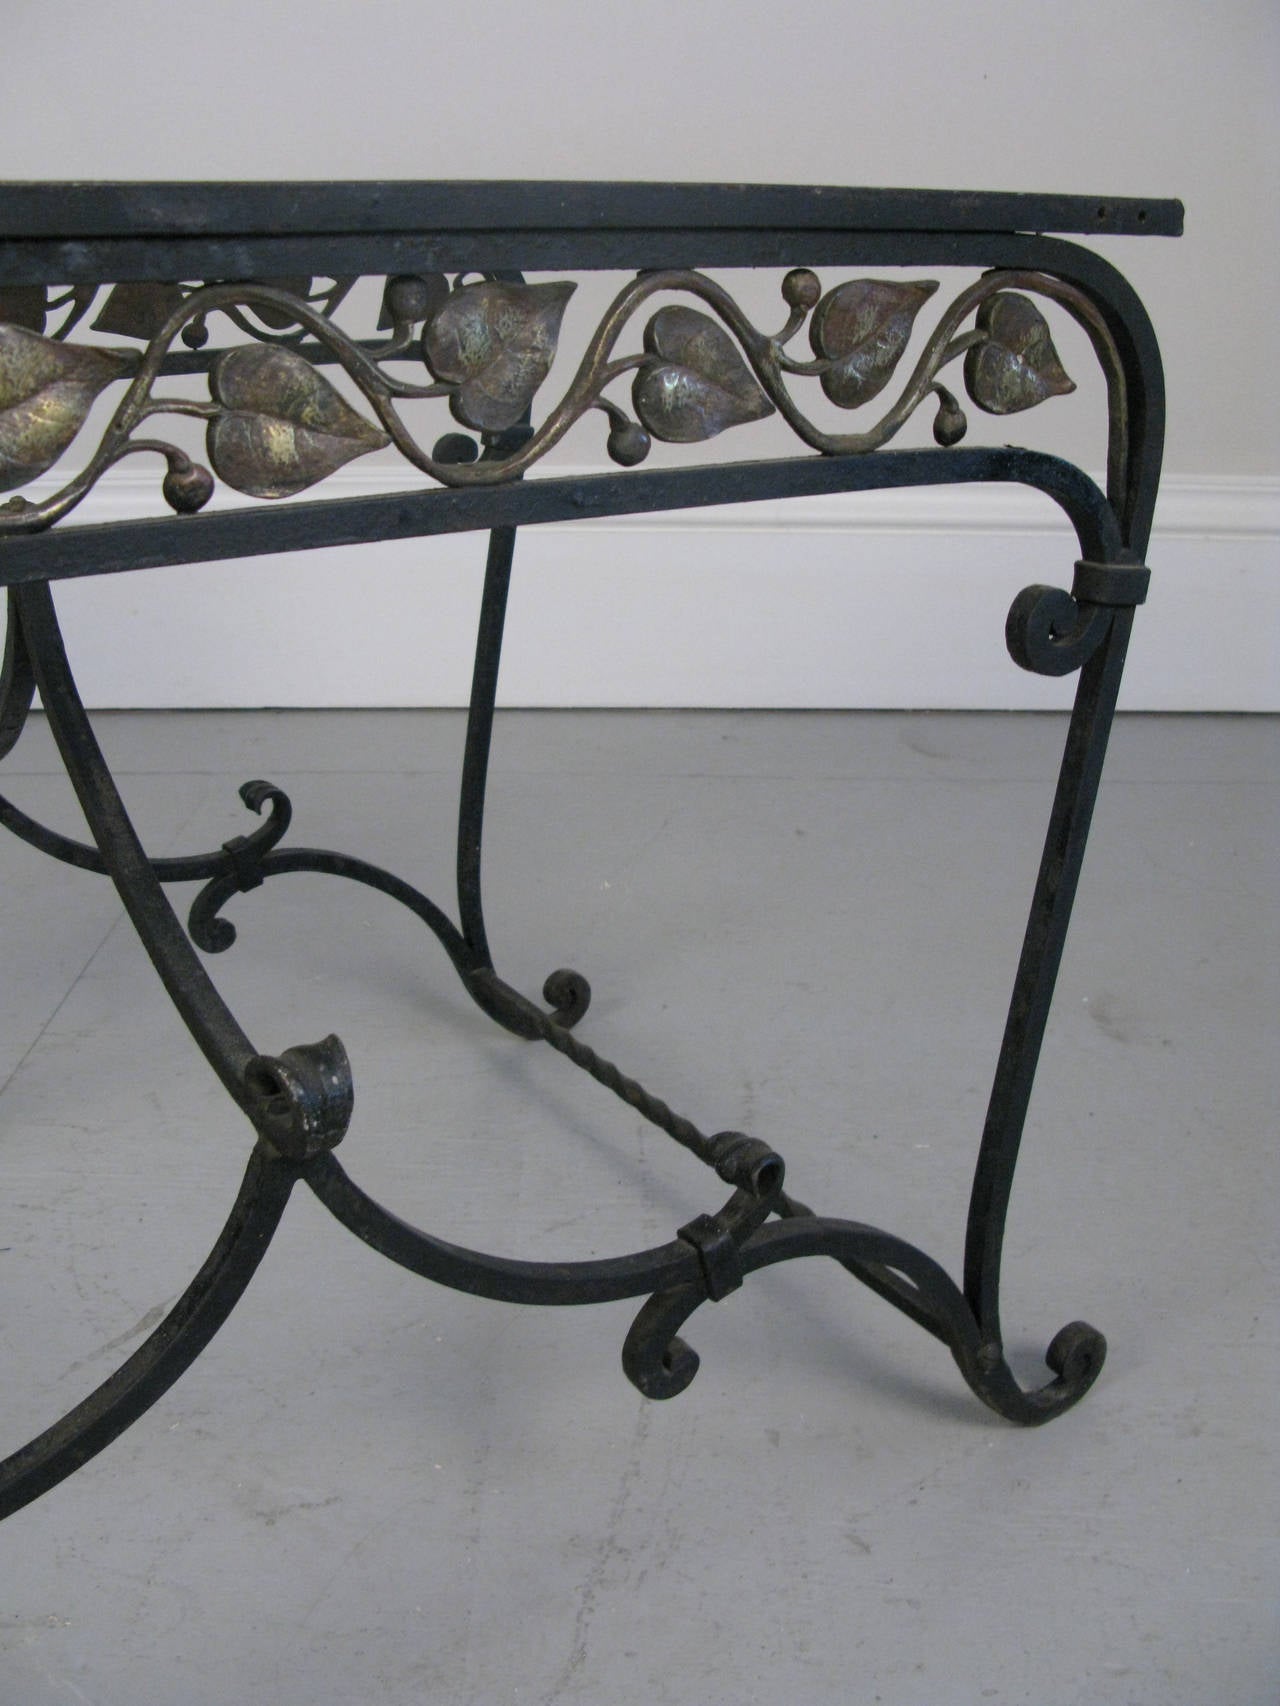 Forged 1950s Wrought Iron Garden Occasional Table For Sale